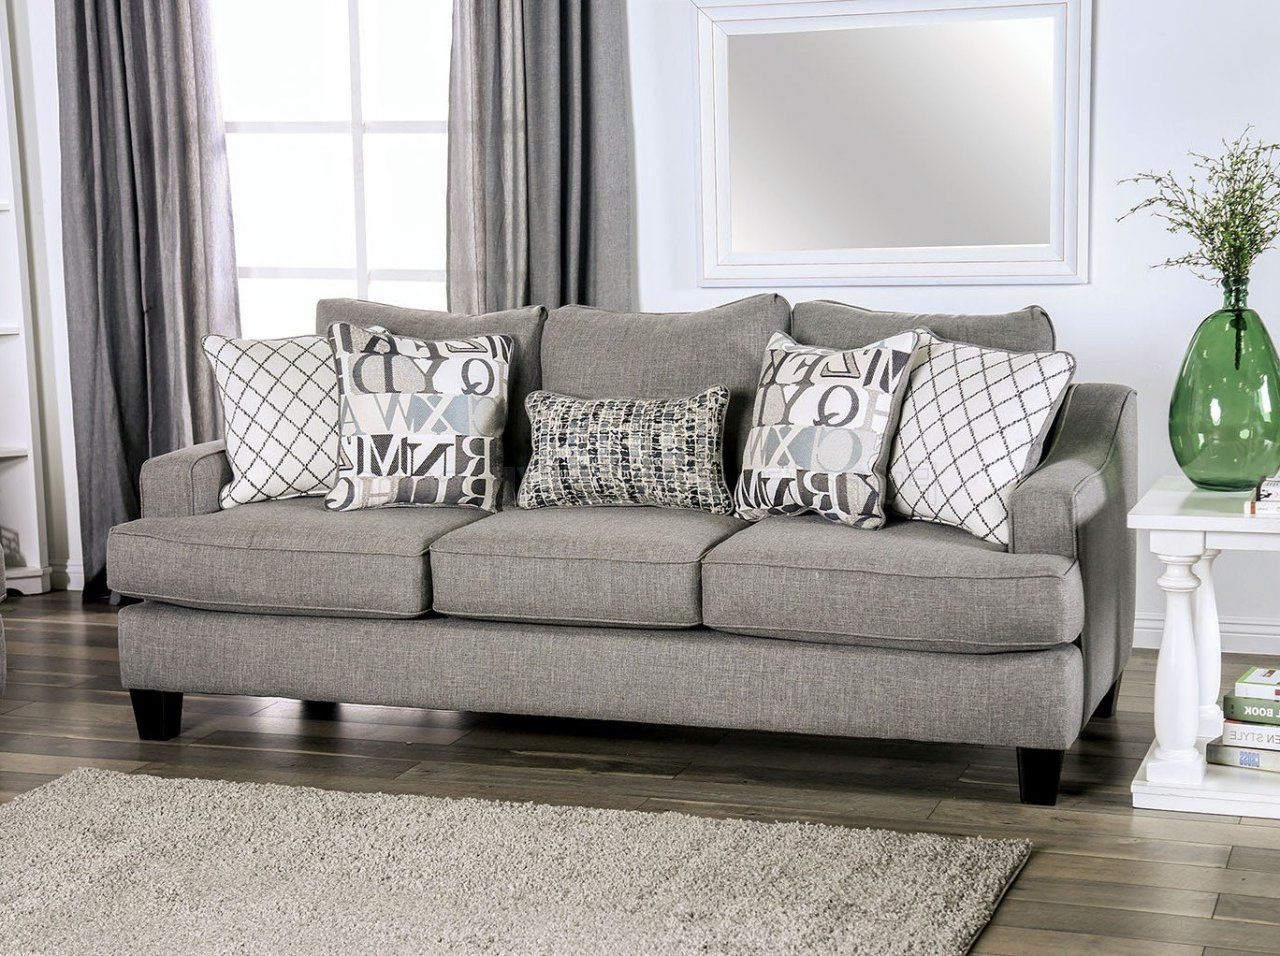 Recent Sofas In Bluish Grey Intended For Verne Sofa Sm8330 In Bluish Gray Linen Like Fabric W/options (View 8 of 15)